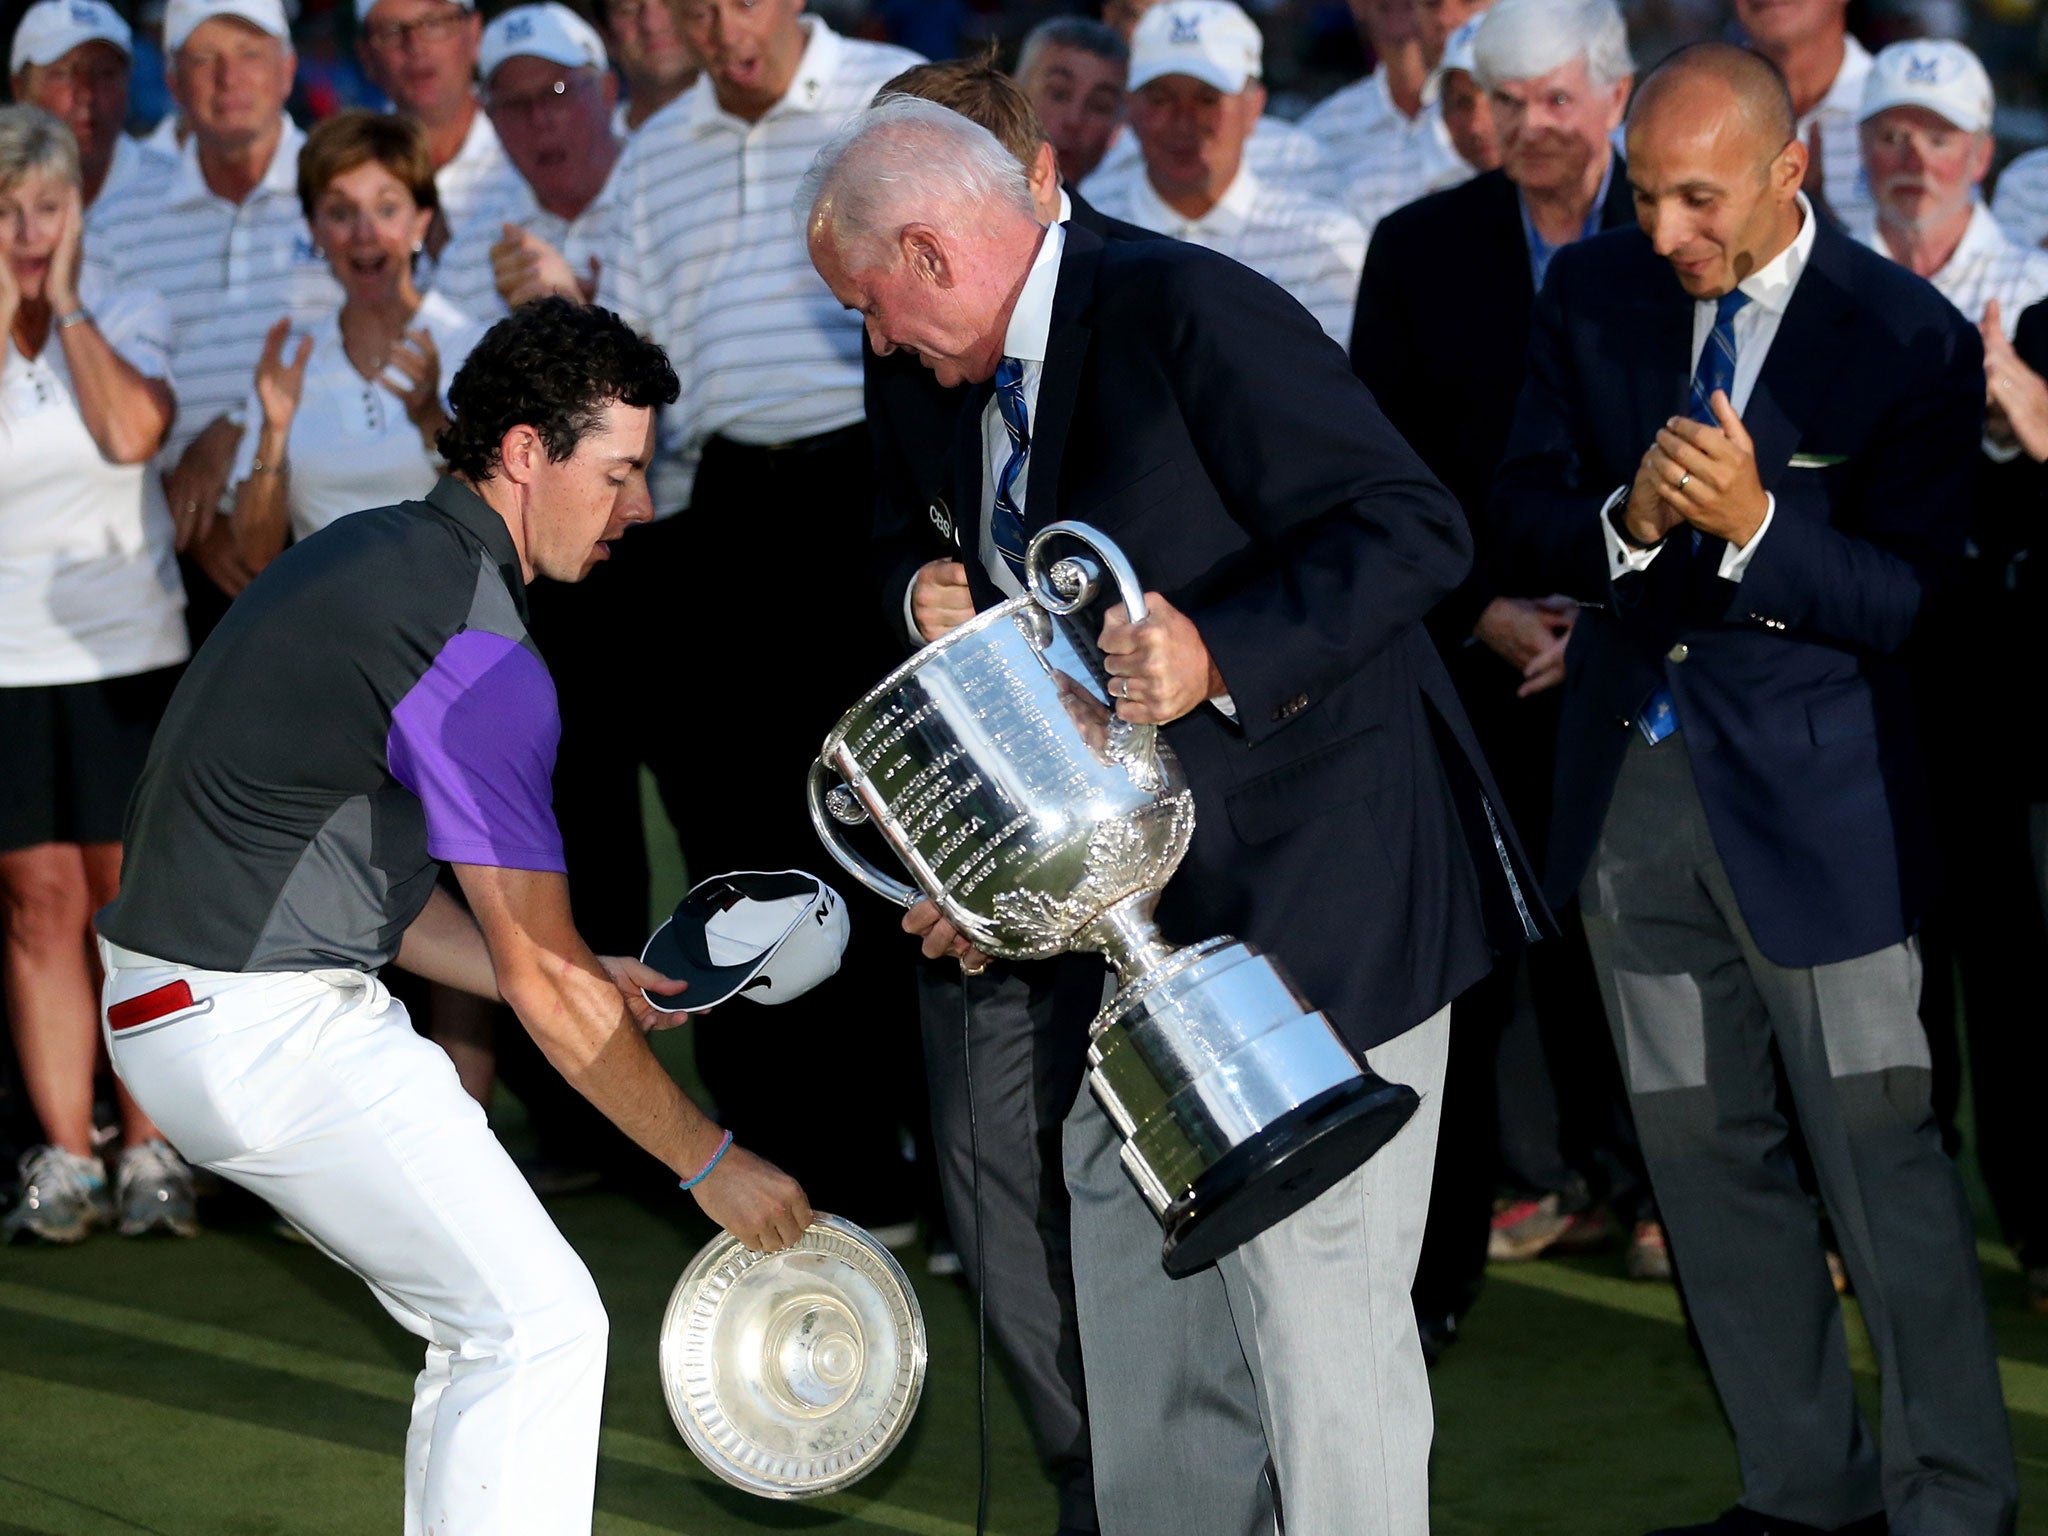 Rory McIlroy catches the lid of the Wanamaker Trophy after winning the US PGA Championship at Valhalla